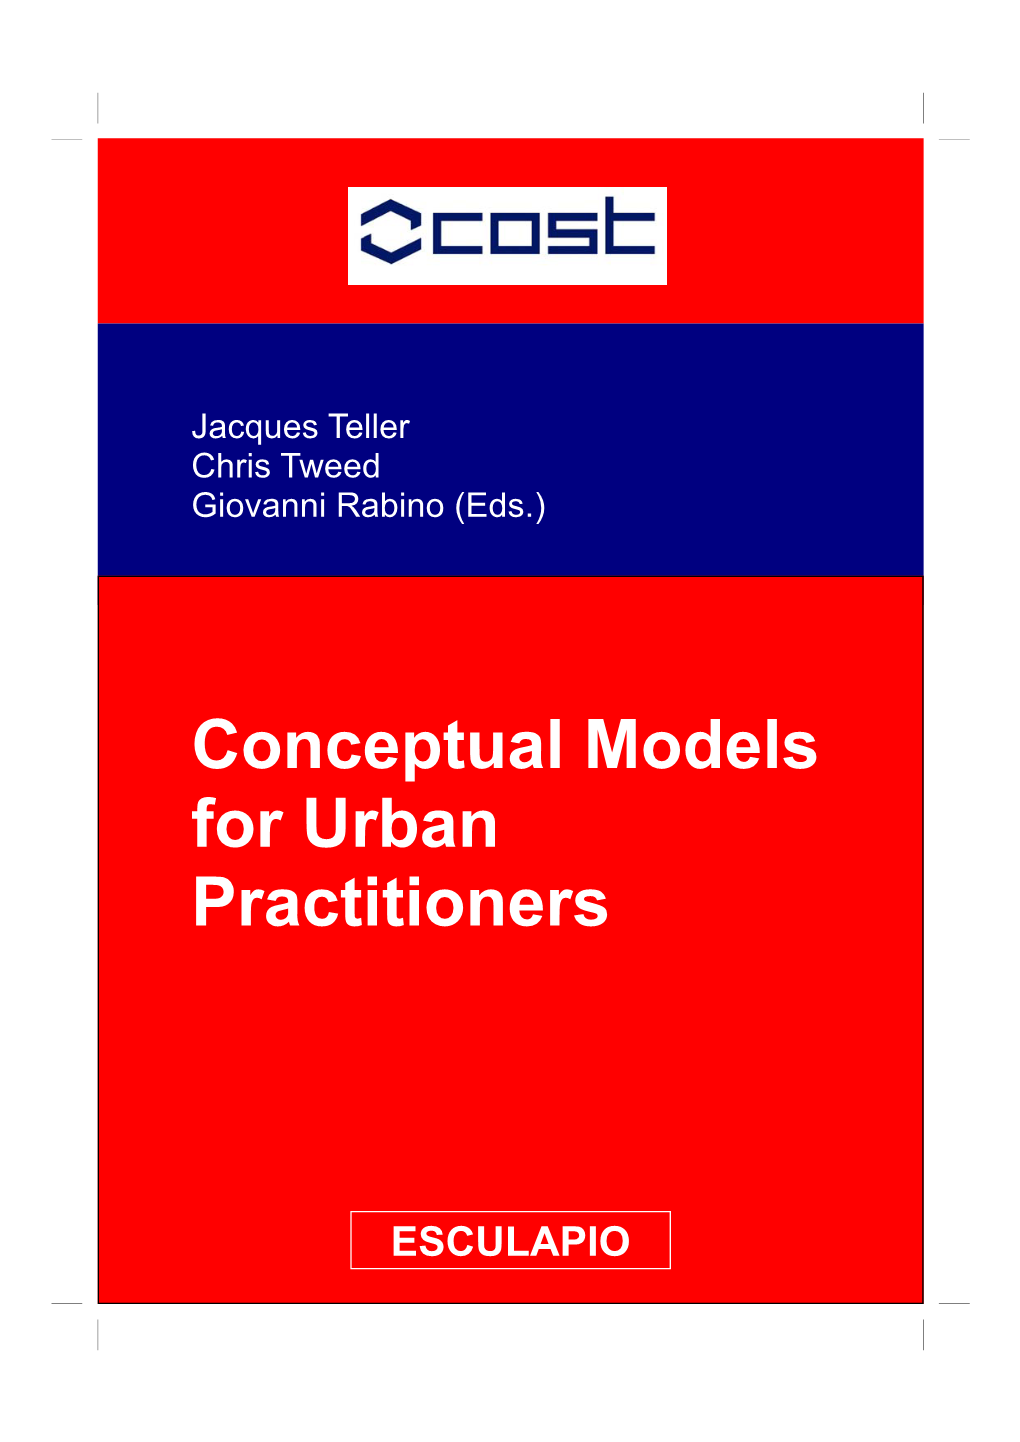 Conceptual Models for Urban Practitioners